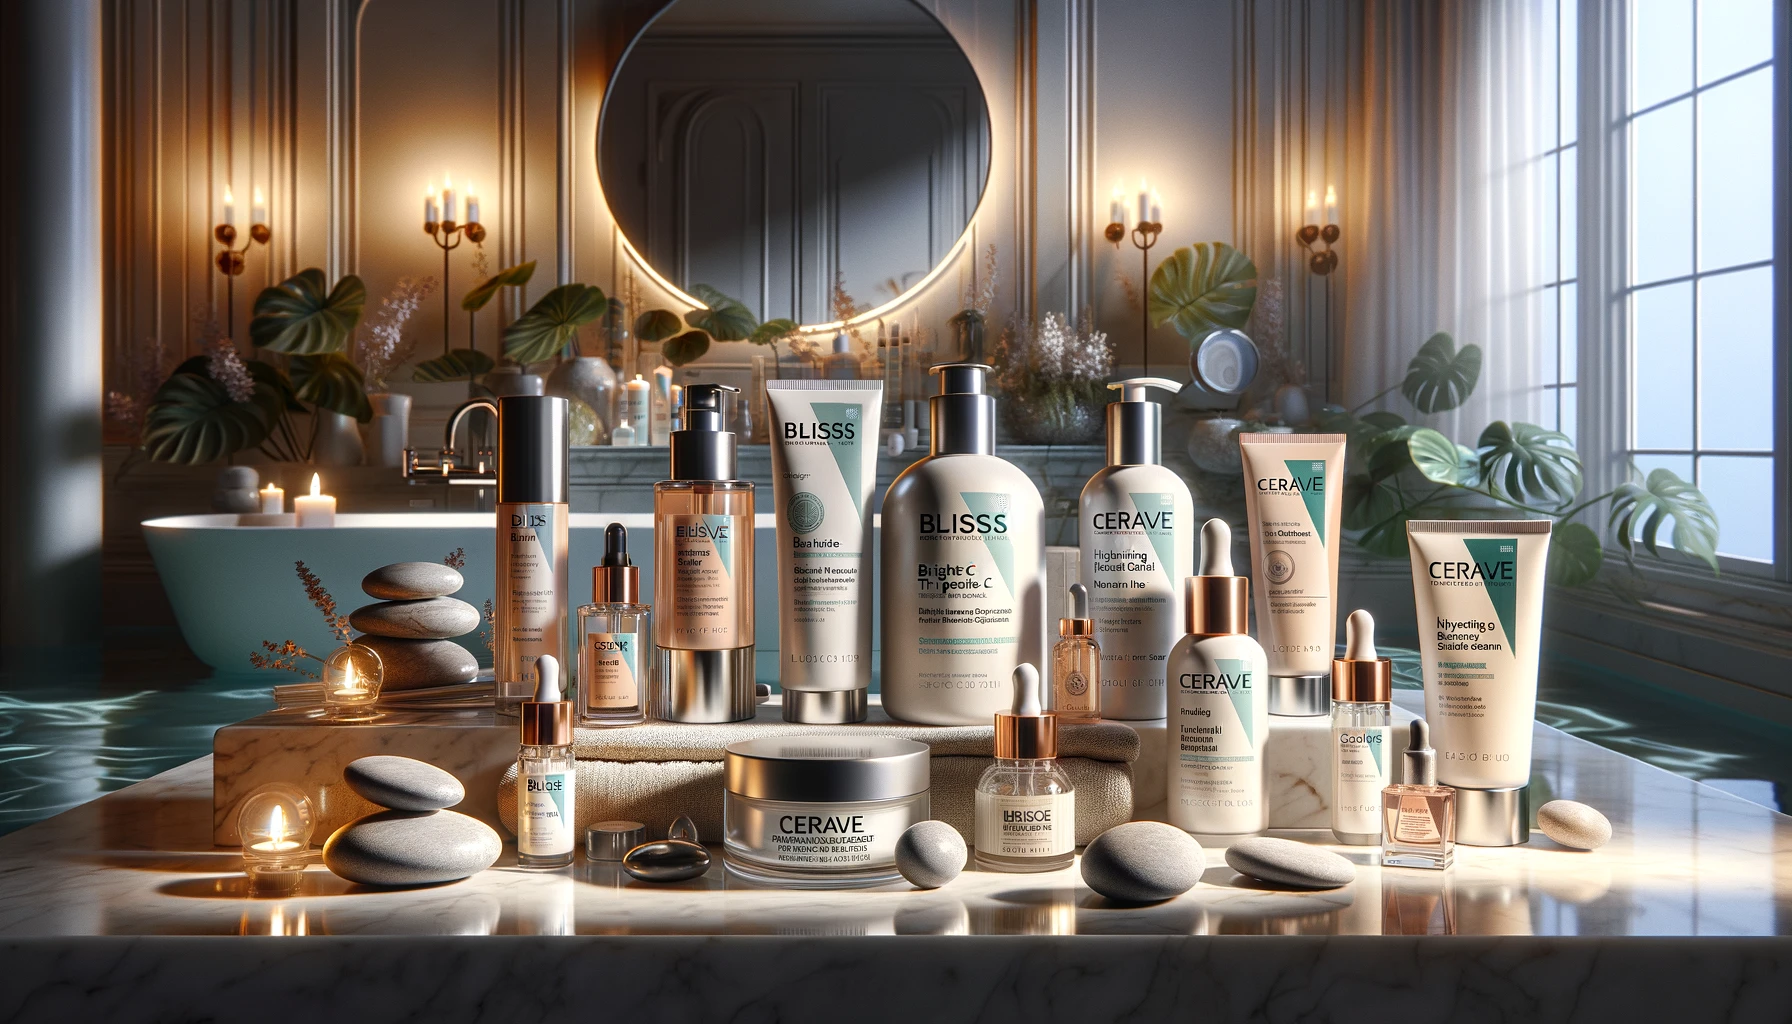 An elegant array of drugstore skincare products, including Bliss Vitamin C Serum, Cerave Hyaluronic Acid Serum, Cerave Eye Cream, Lansinoh cream, La Roche-Posay Sunscreen, and Palmer's Coconut Oil Lotion, arranged in a serene setting with natural elements.